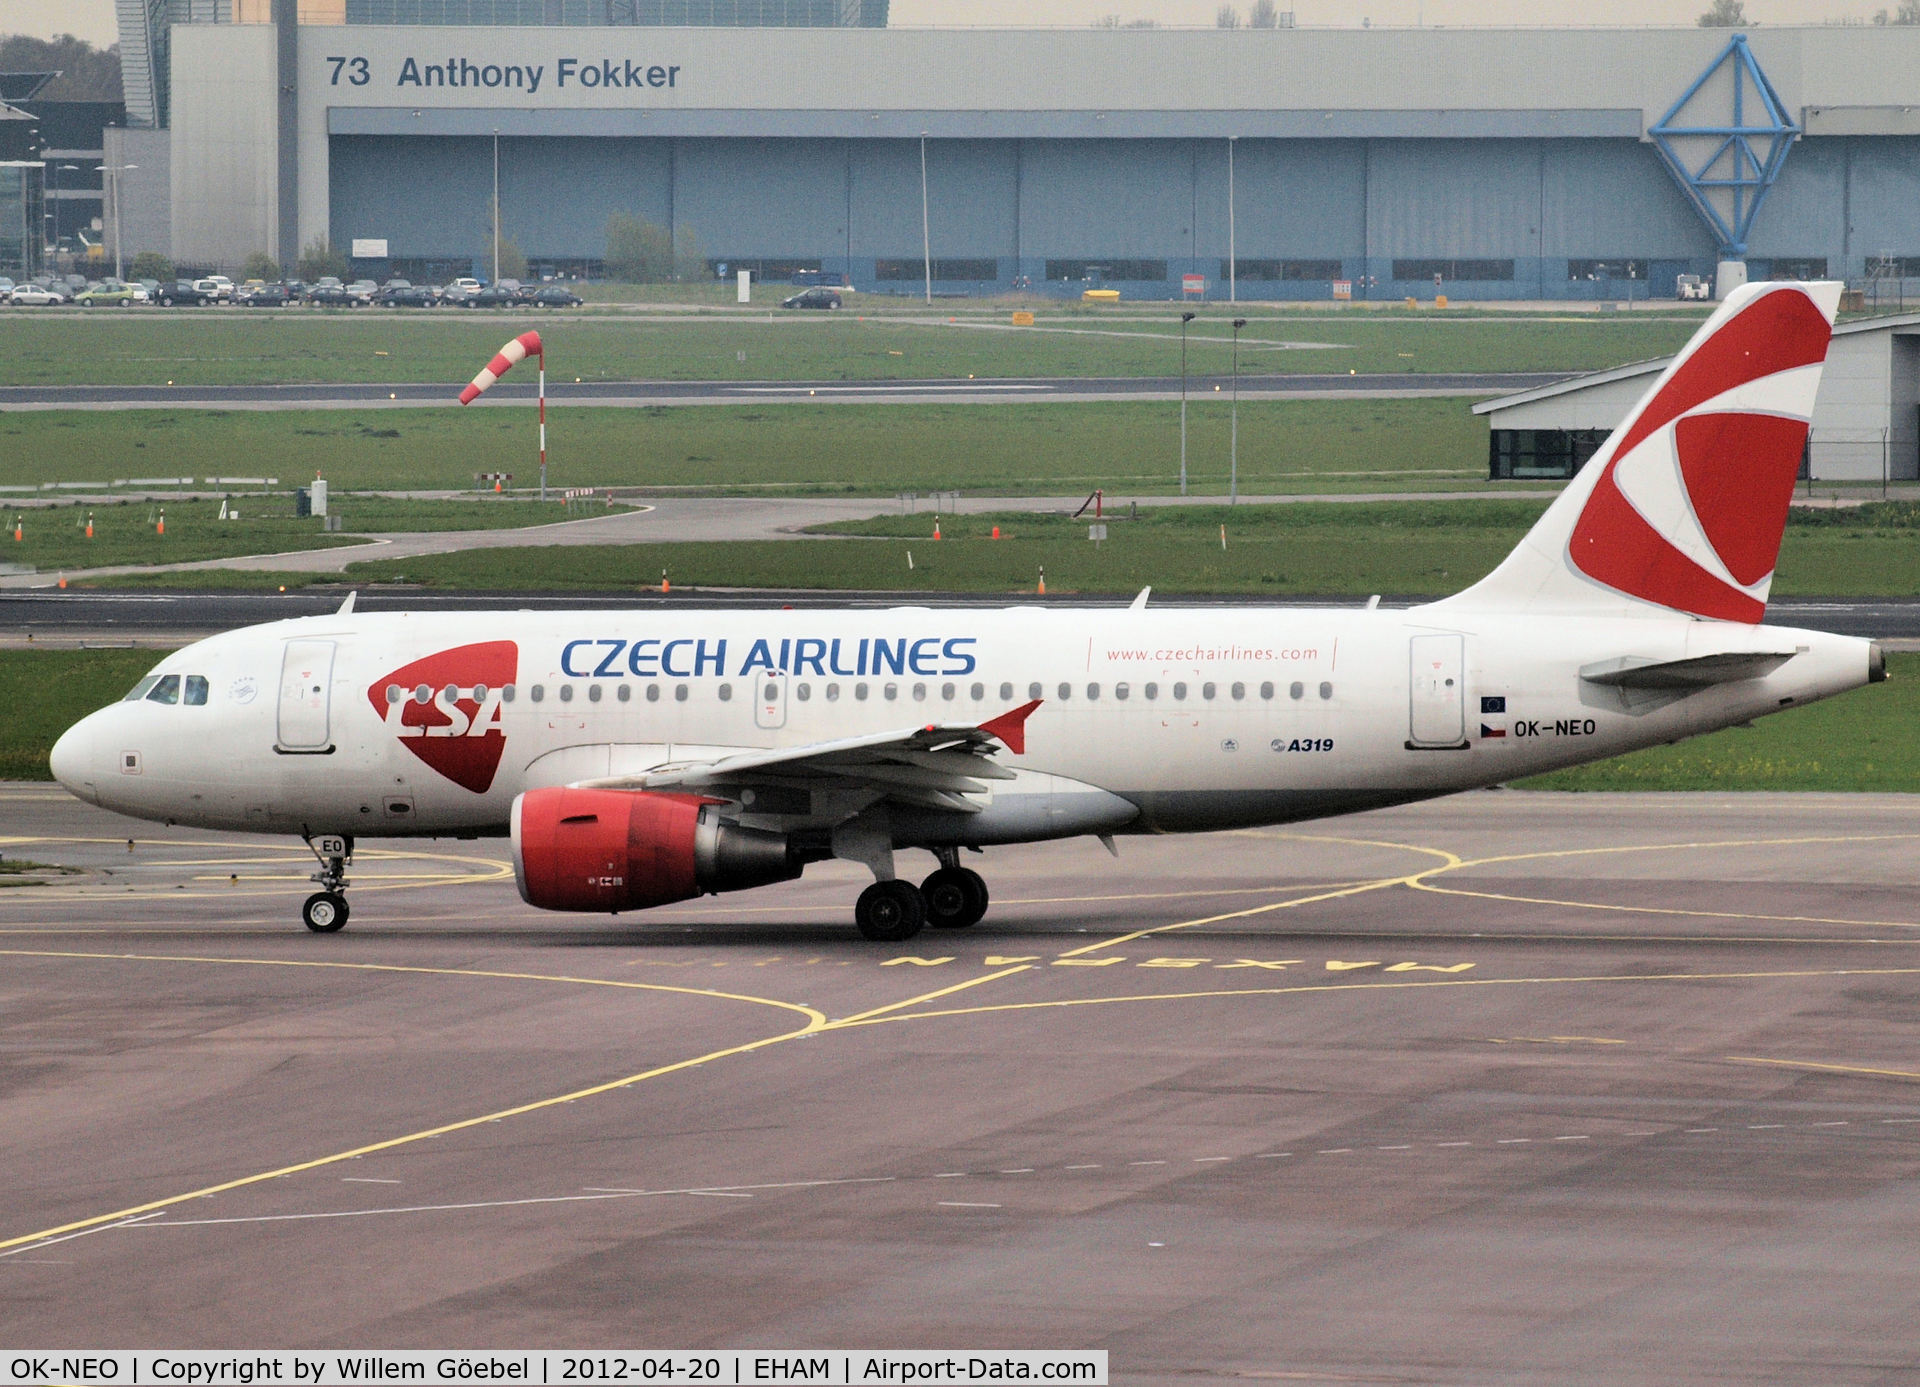 OK-NEO, 2008 Airbus A319-112 C/N 3452, Taxi to the runway of Schiphol Airport